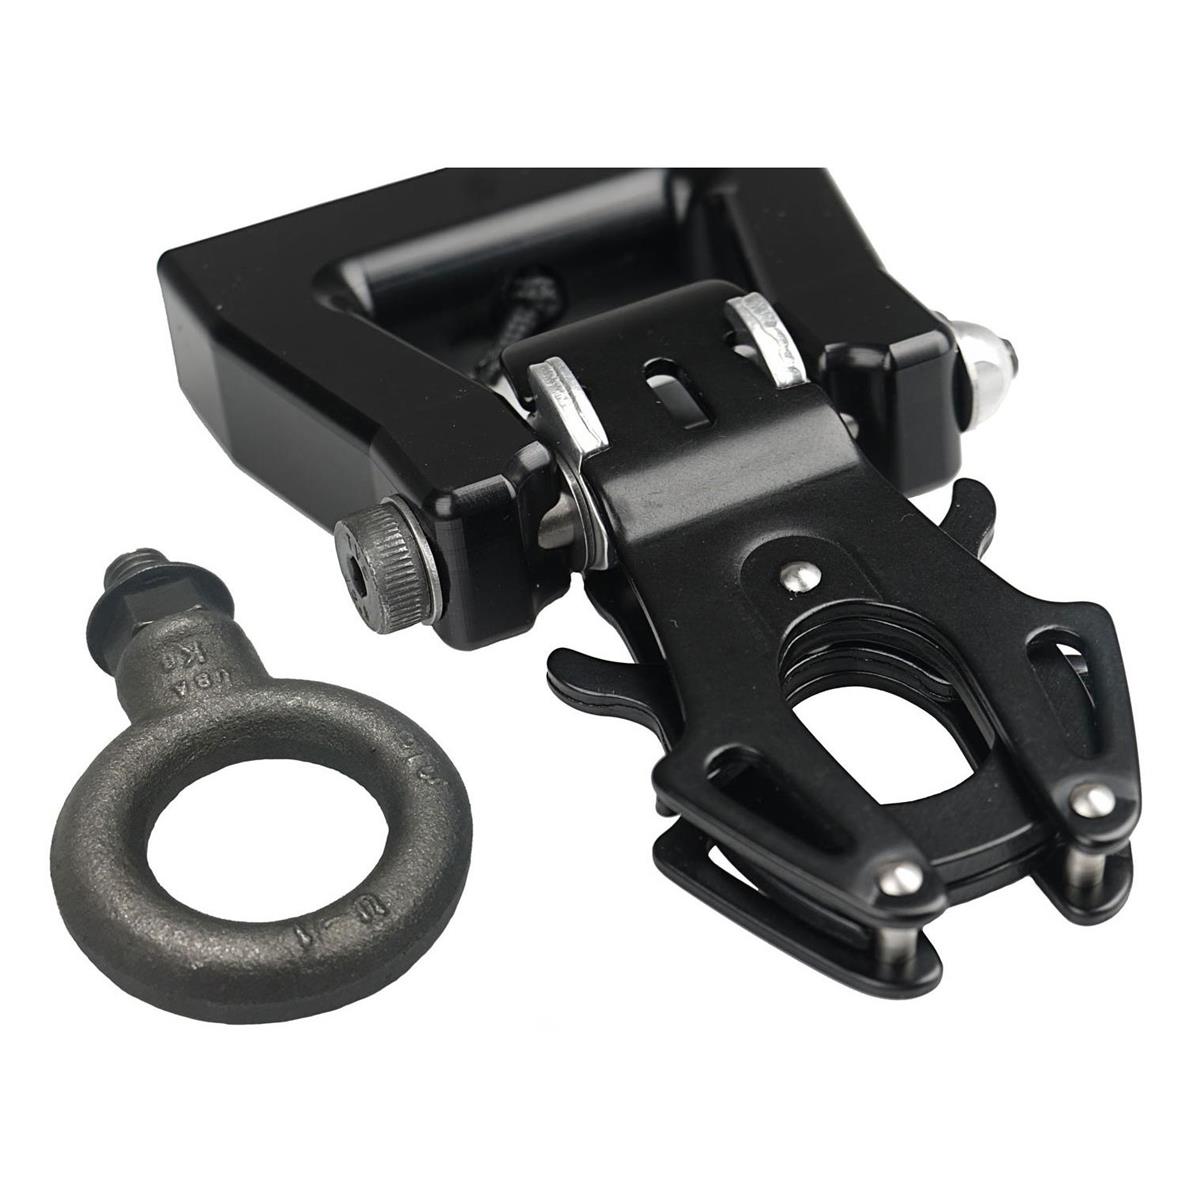 Image of 16x9 Easyrig to Kong Quick Release Adapter with 3/8&quot;-16 Eyebolt